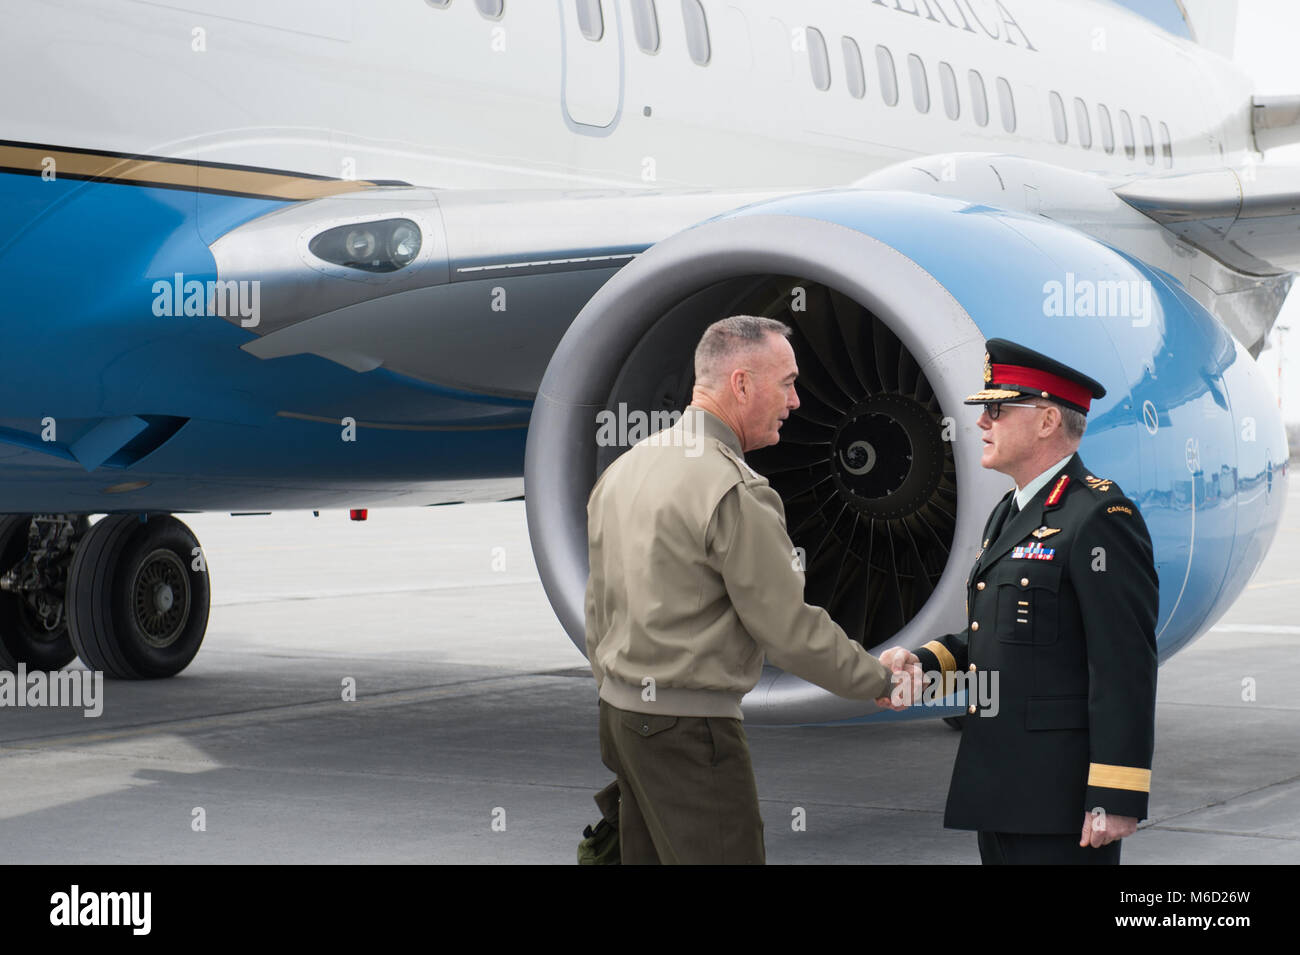 Canadian Brig. Gen. Brian McPherson, right, Chief of the Defence Staff Liaison Officer to the Chairman of the Joint Chiefs of Staff (CJCS), greets U.S. Marine Corps Gen. Joe Dunford, CJCS, upon arrival in Ottawa, Canada, Feb. 27, 2018. Gen. Dunford was in Ottawa for meetings with senior Canadian officials on the ongoing evolution of the North American Aerospace Defense Command. (DoD Photo by U.S. Army Sgt. James K. McCann) Stock Photo